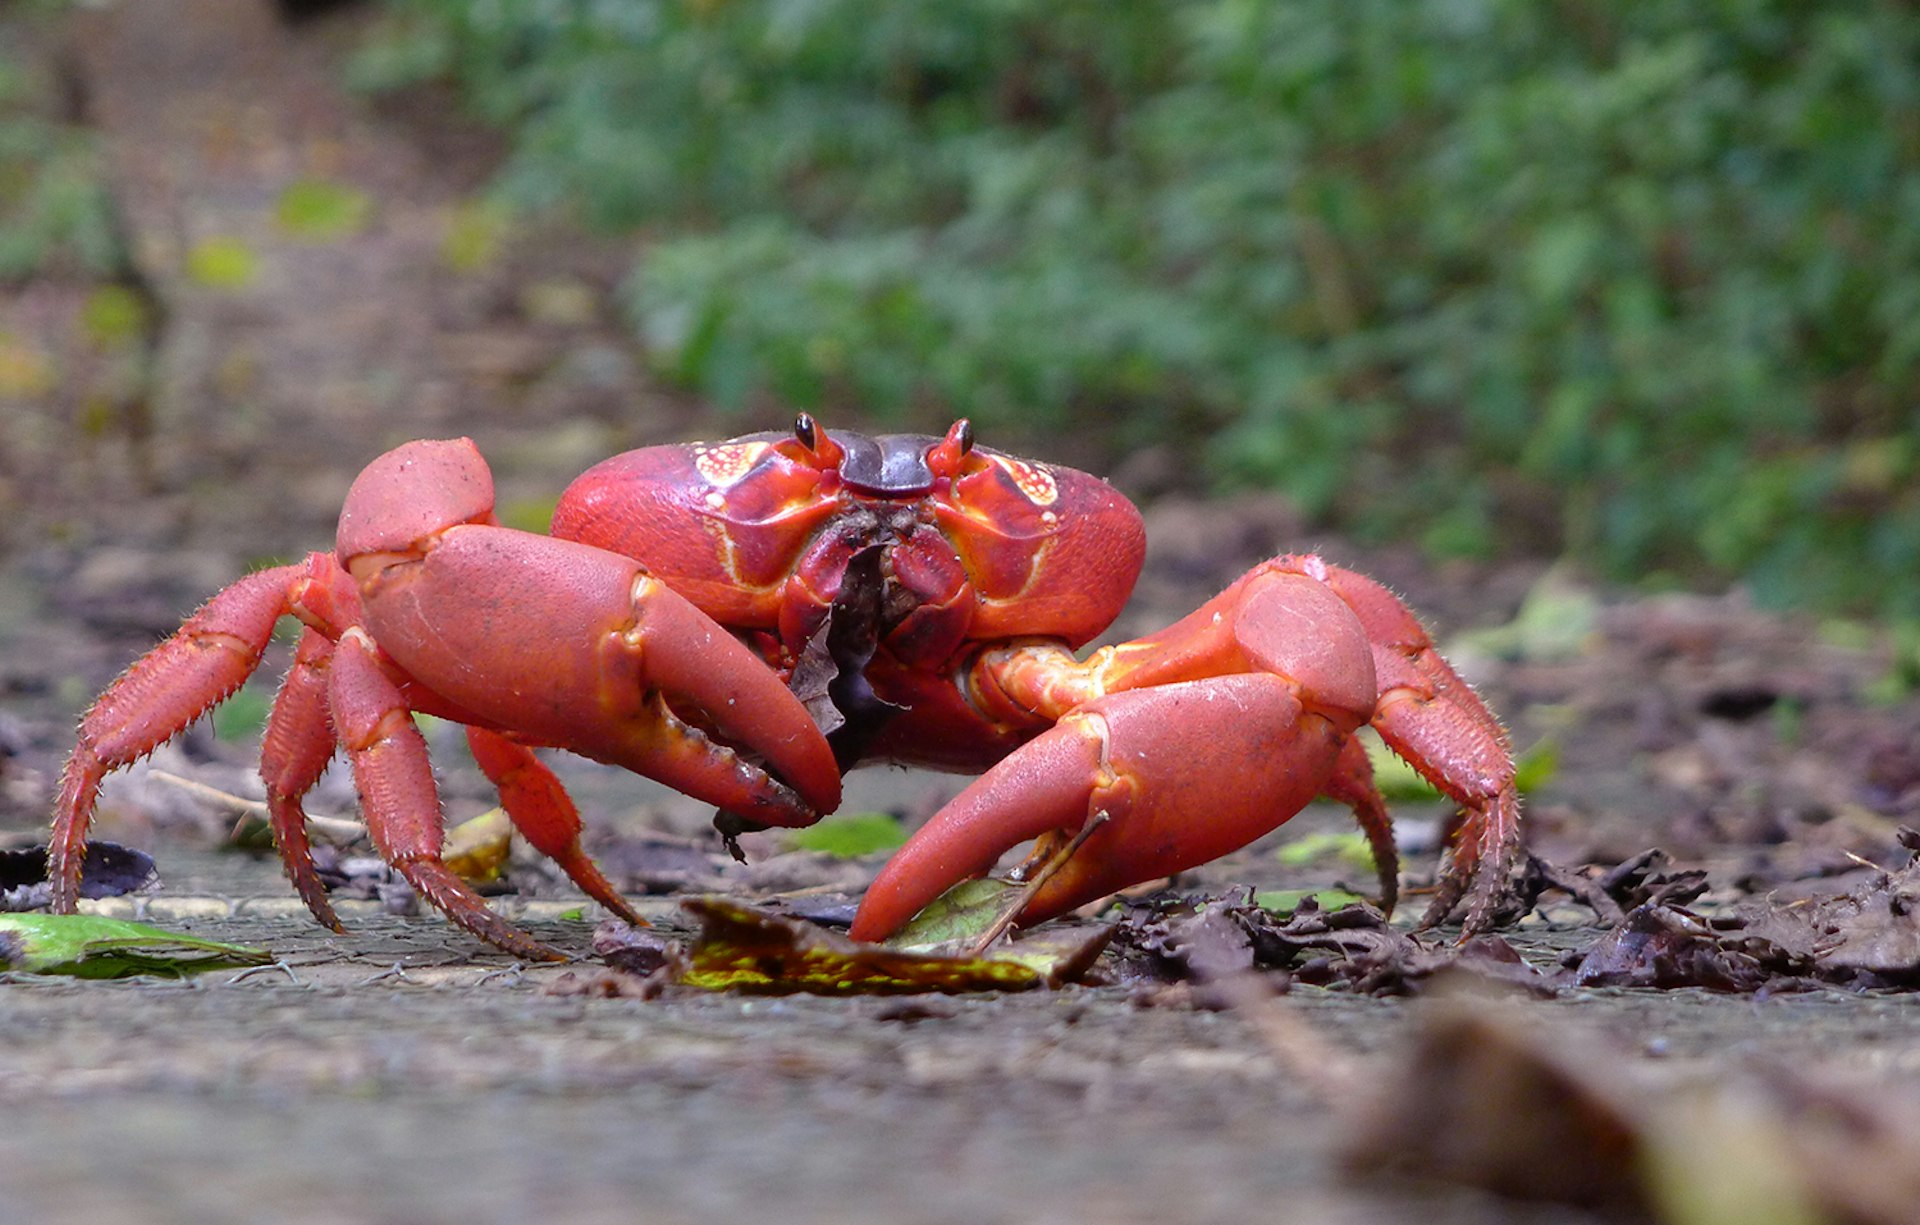 Christmas Island's red crabs: watch these scarlet scuttlers amass in their thousands during mating season. Image by John Tann / CC BY 2.0